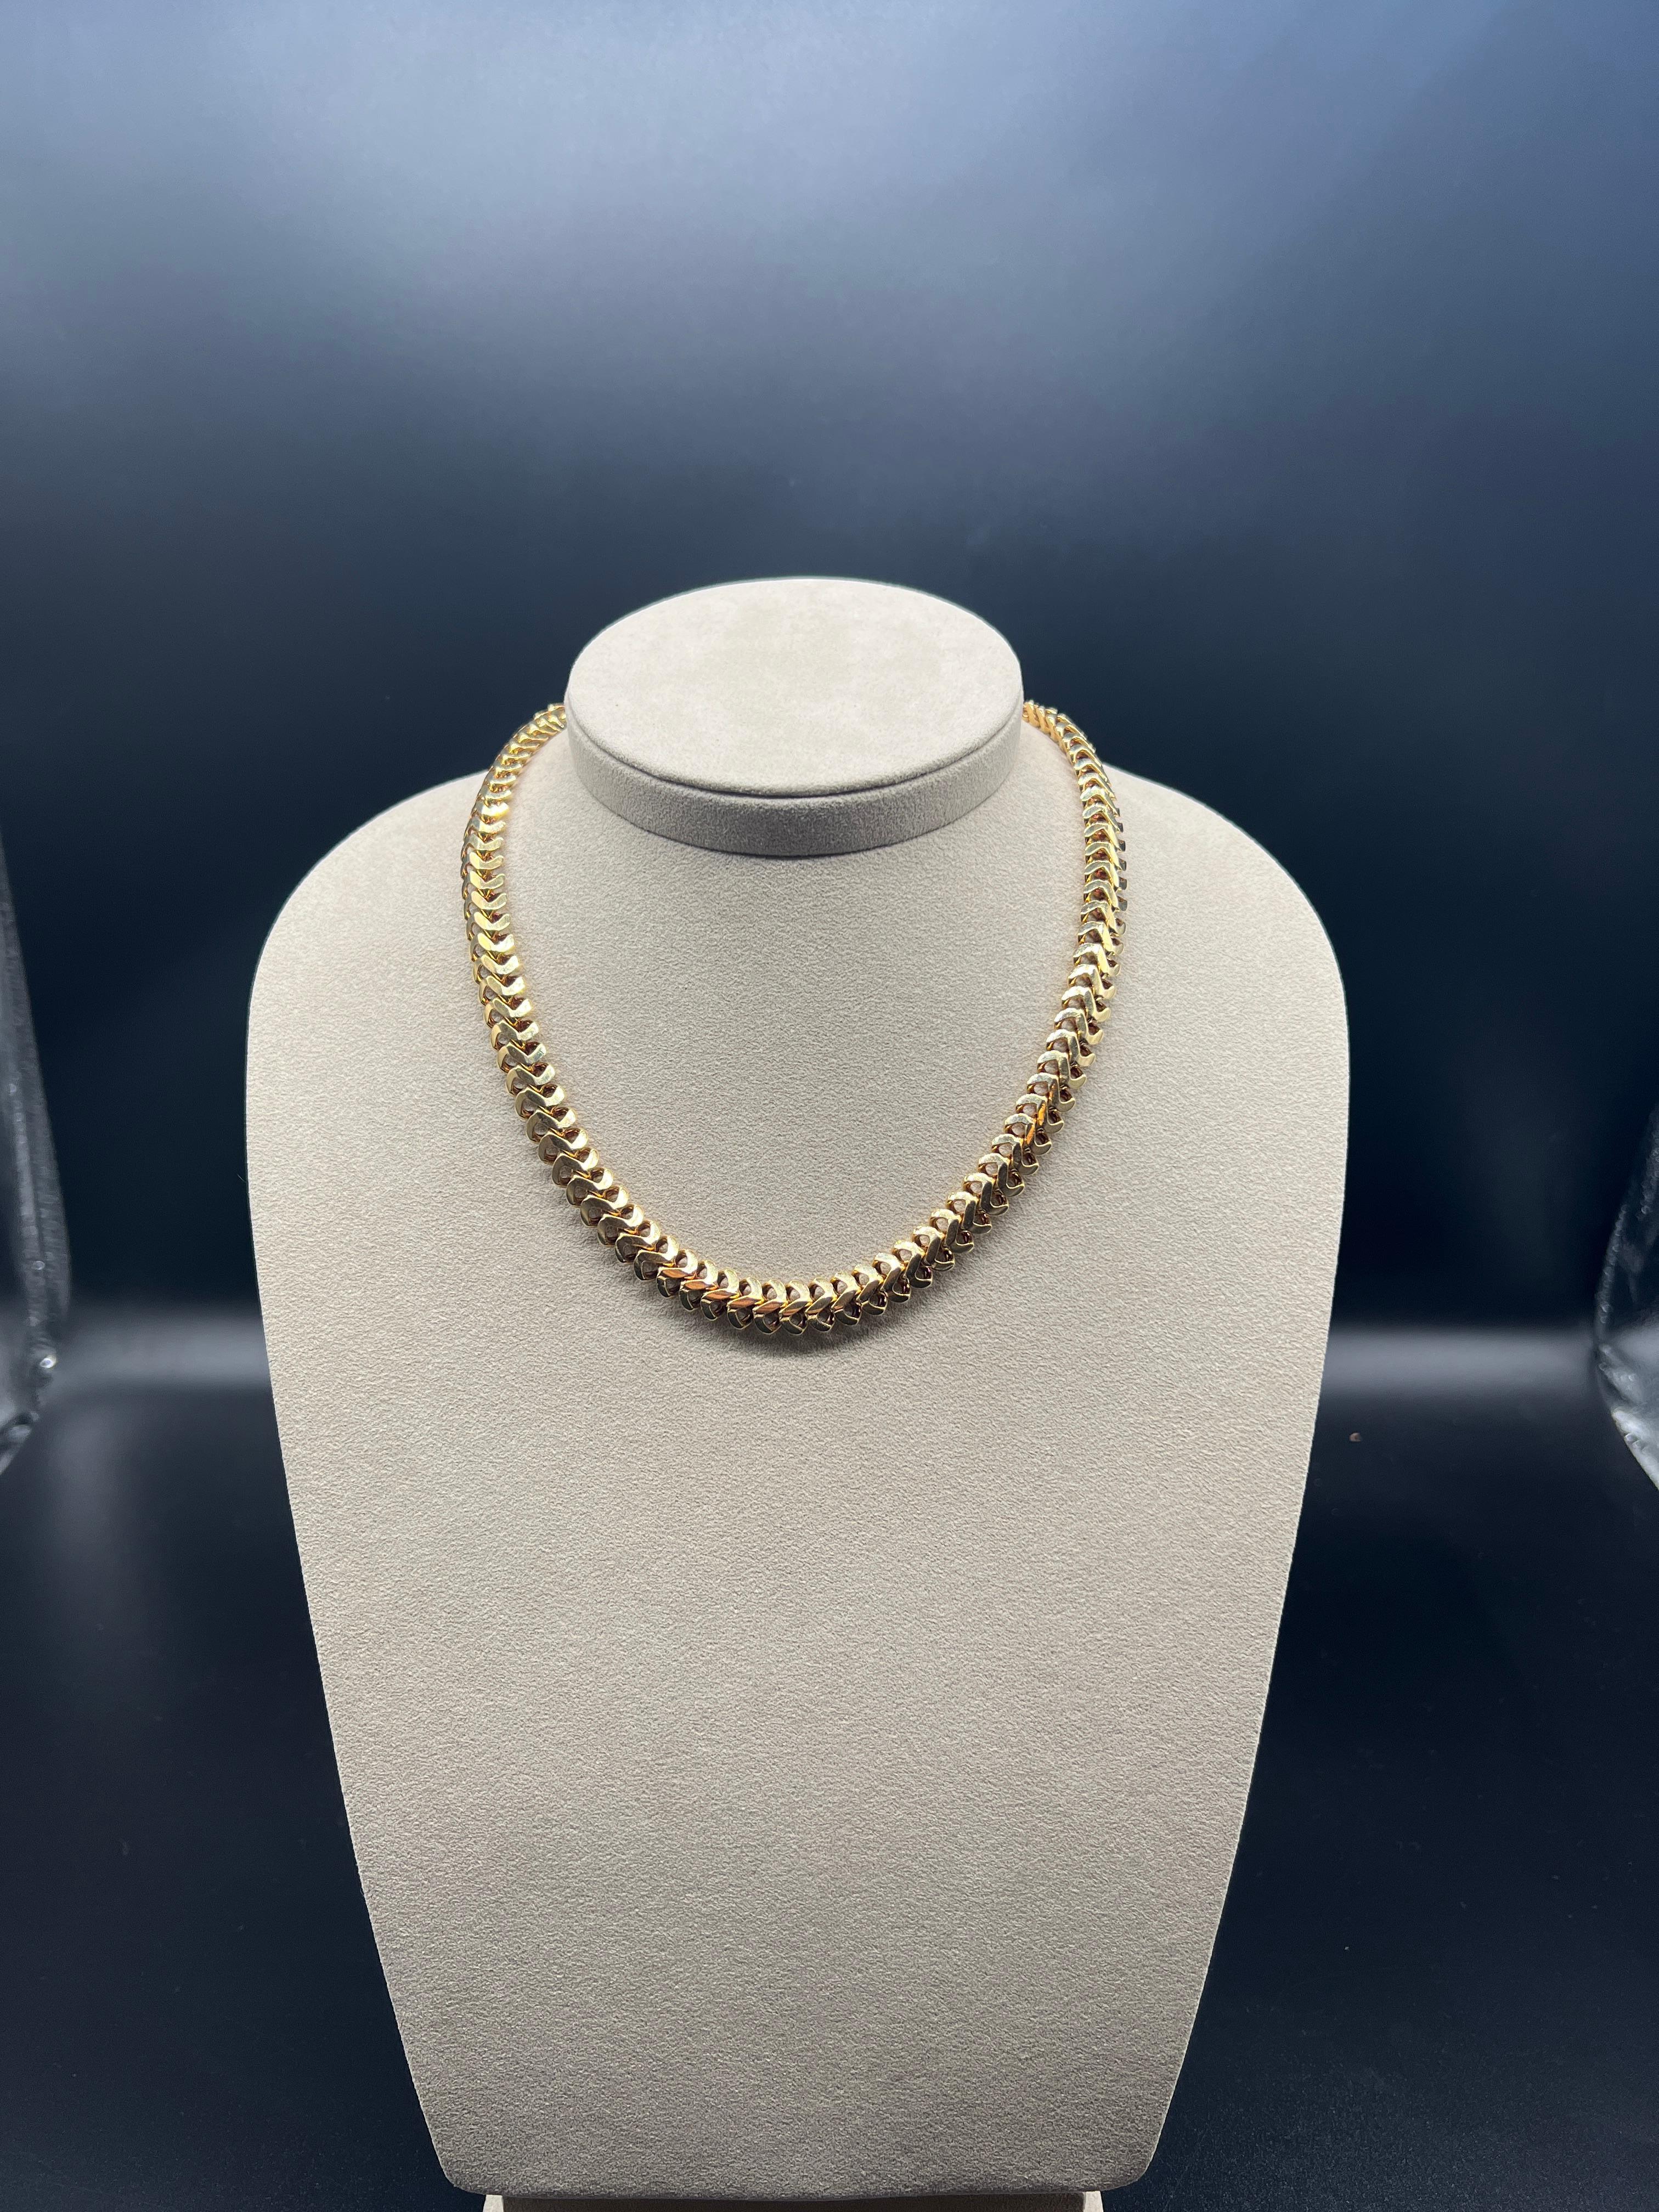 Discover this incredible necklace in 750/000 yellow gold featuring American drop mesh, a truly remarkable piece. Known primarily as a bracelet since the 1950s, this mesh is quite rare when transformed into a necklace of such importance.

This